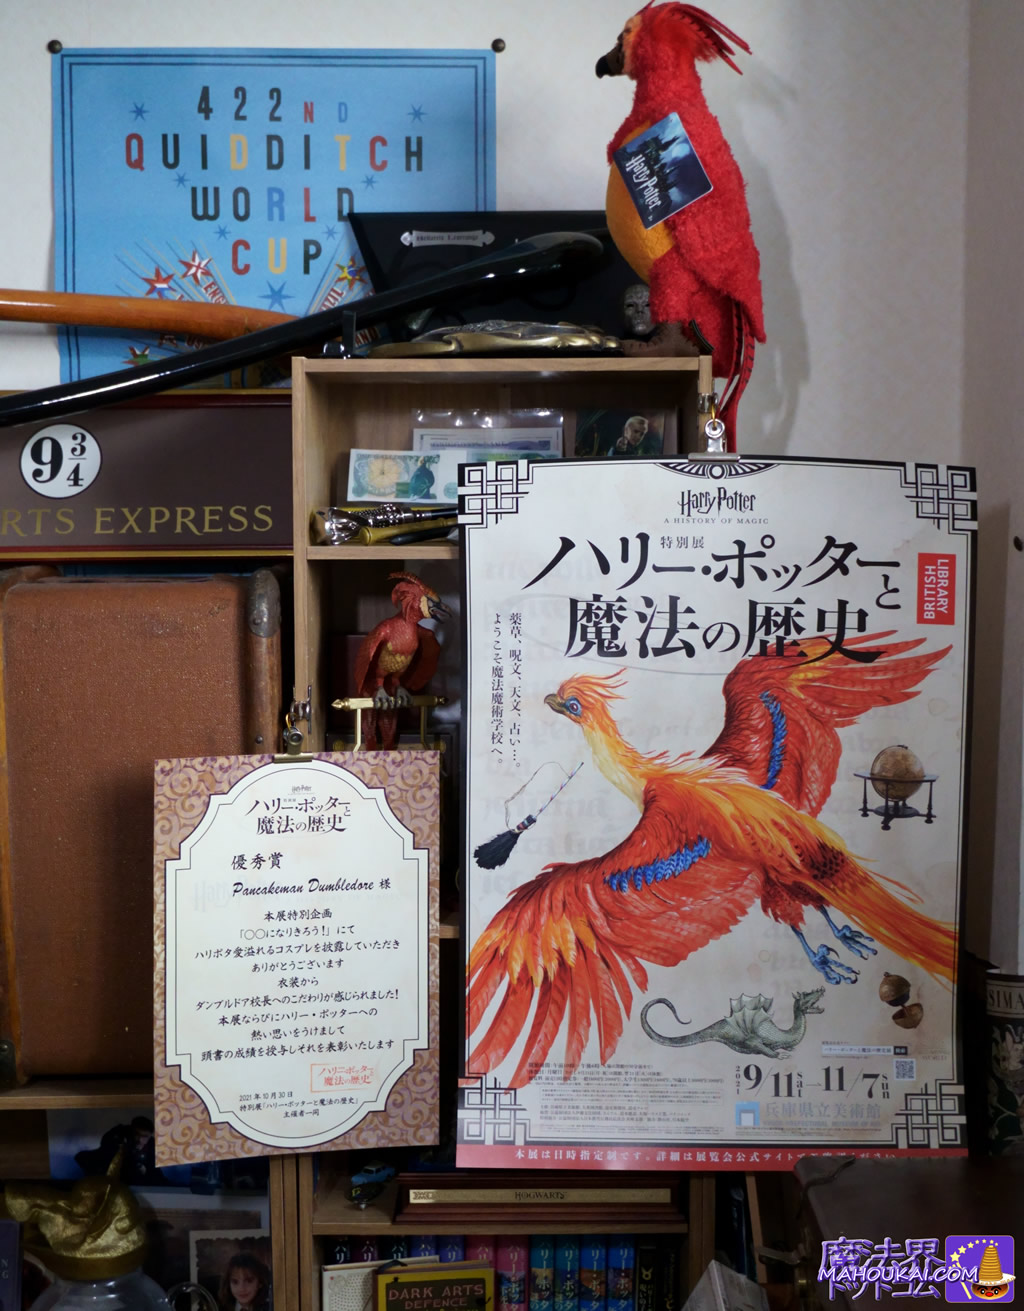 'Harry Potter and the History of Magic Exhibition', # Harriotta Exhibition Cosplay Poster and Certificate of Recognition.